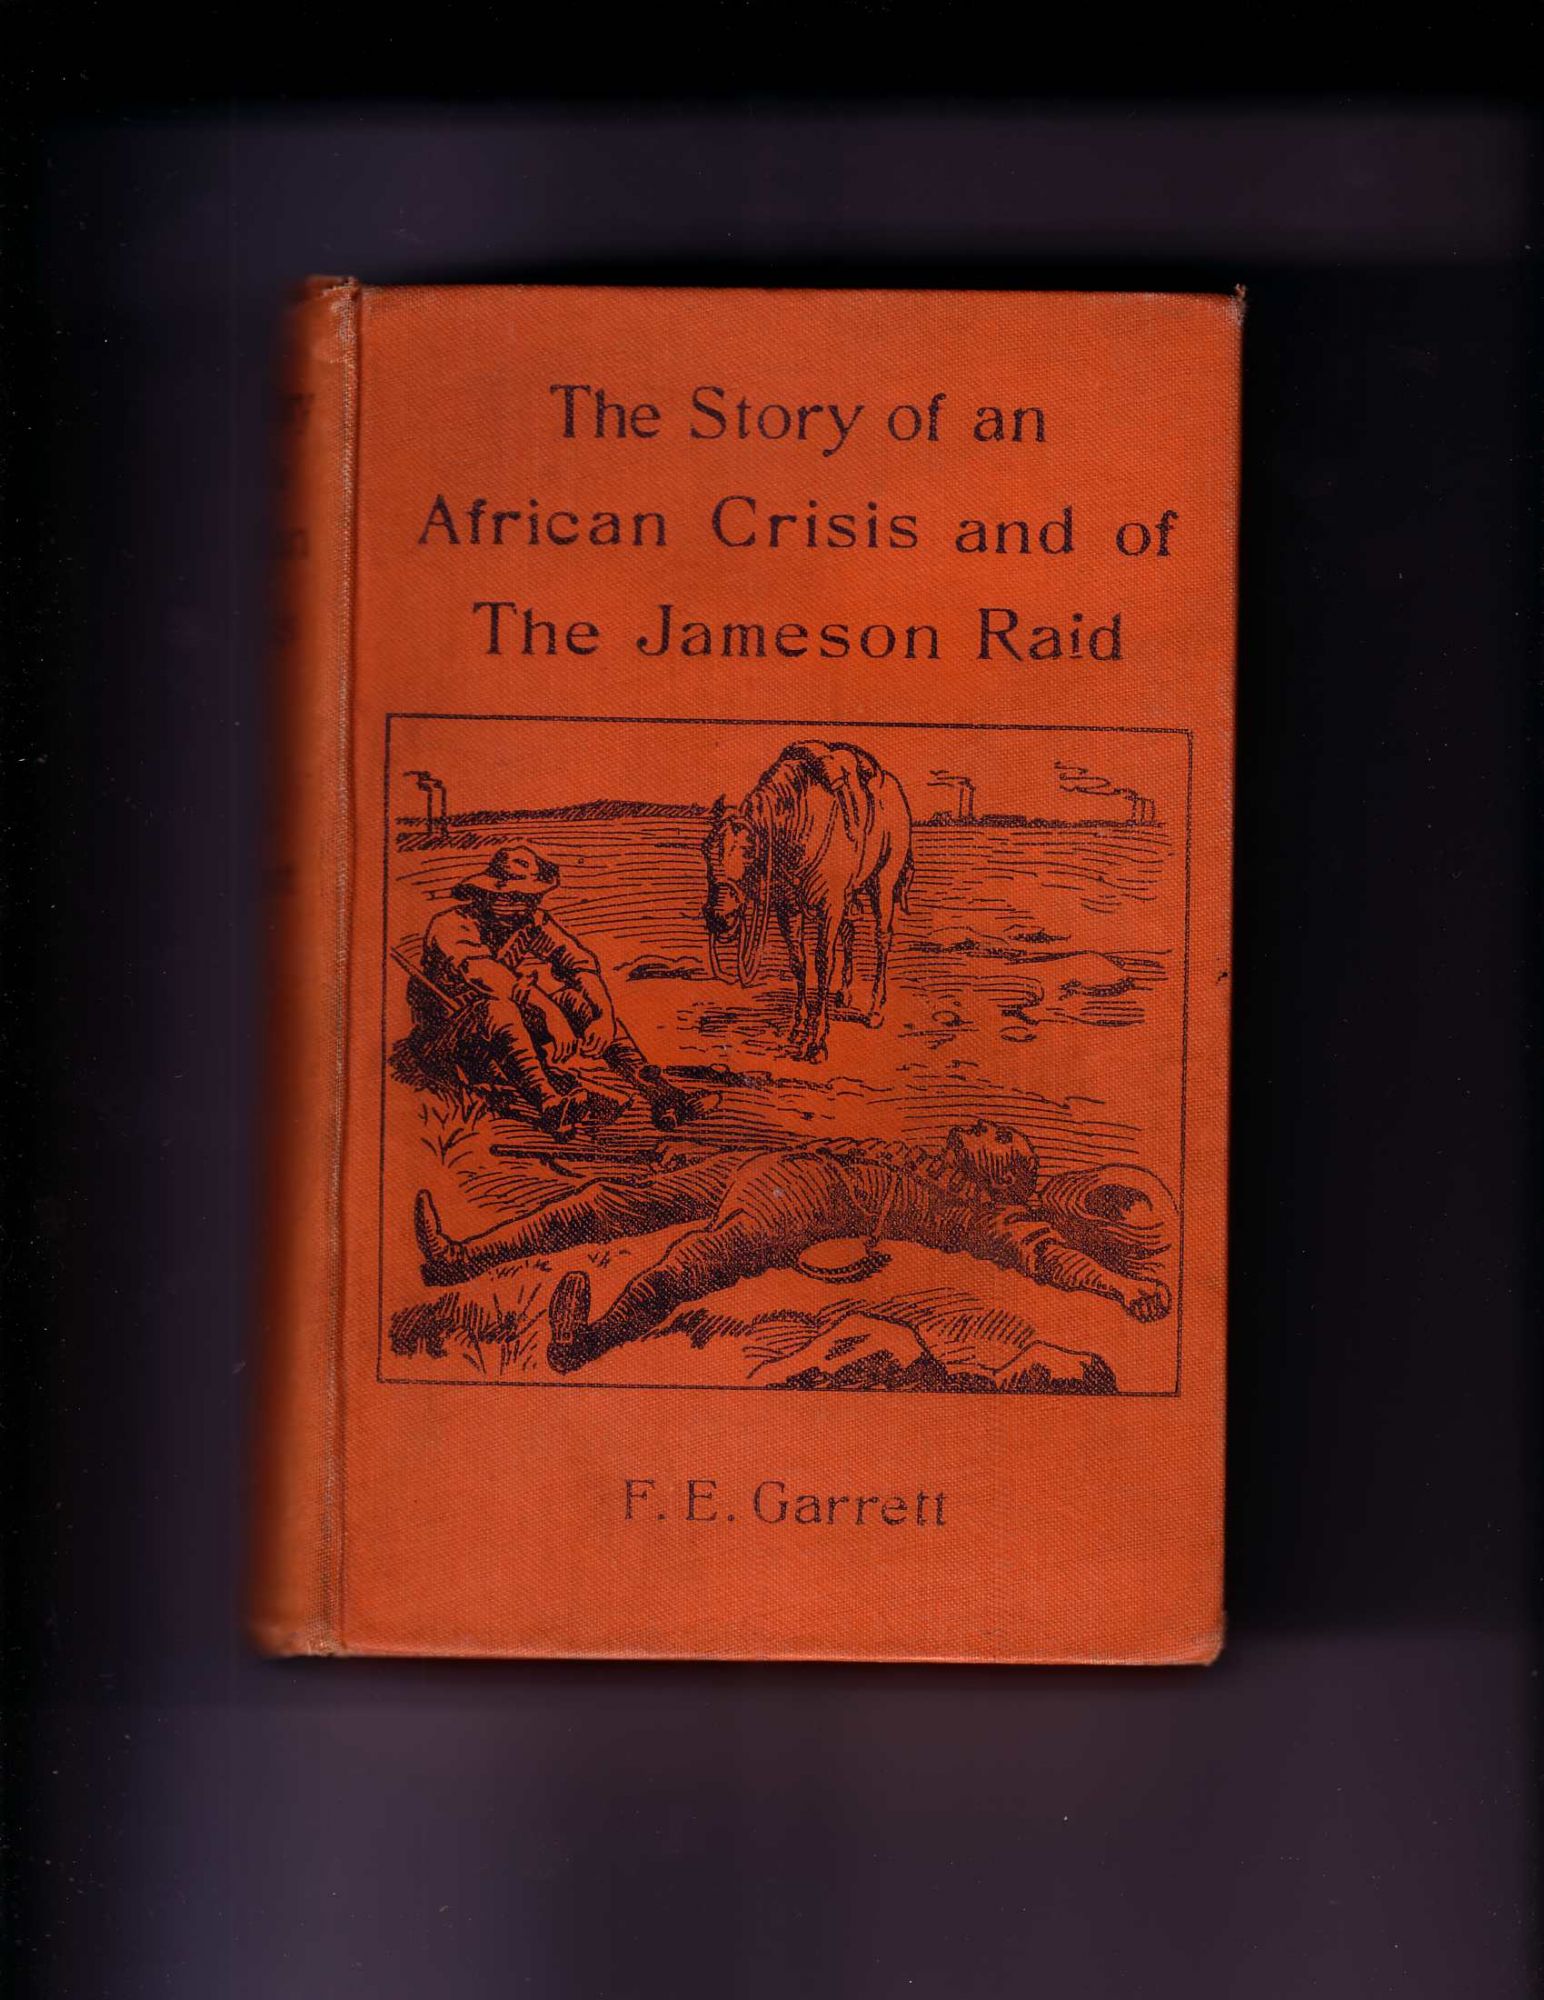 Garrett, Edmund and E.J. Edwards - The Story of an African Crisis : Being the Truth About the Jameson Raid and Johannesburg Revolt of 1896 Told with the Assistance of the Leading Actors in the Drama